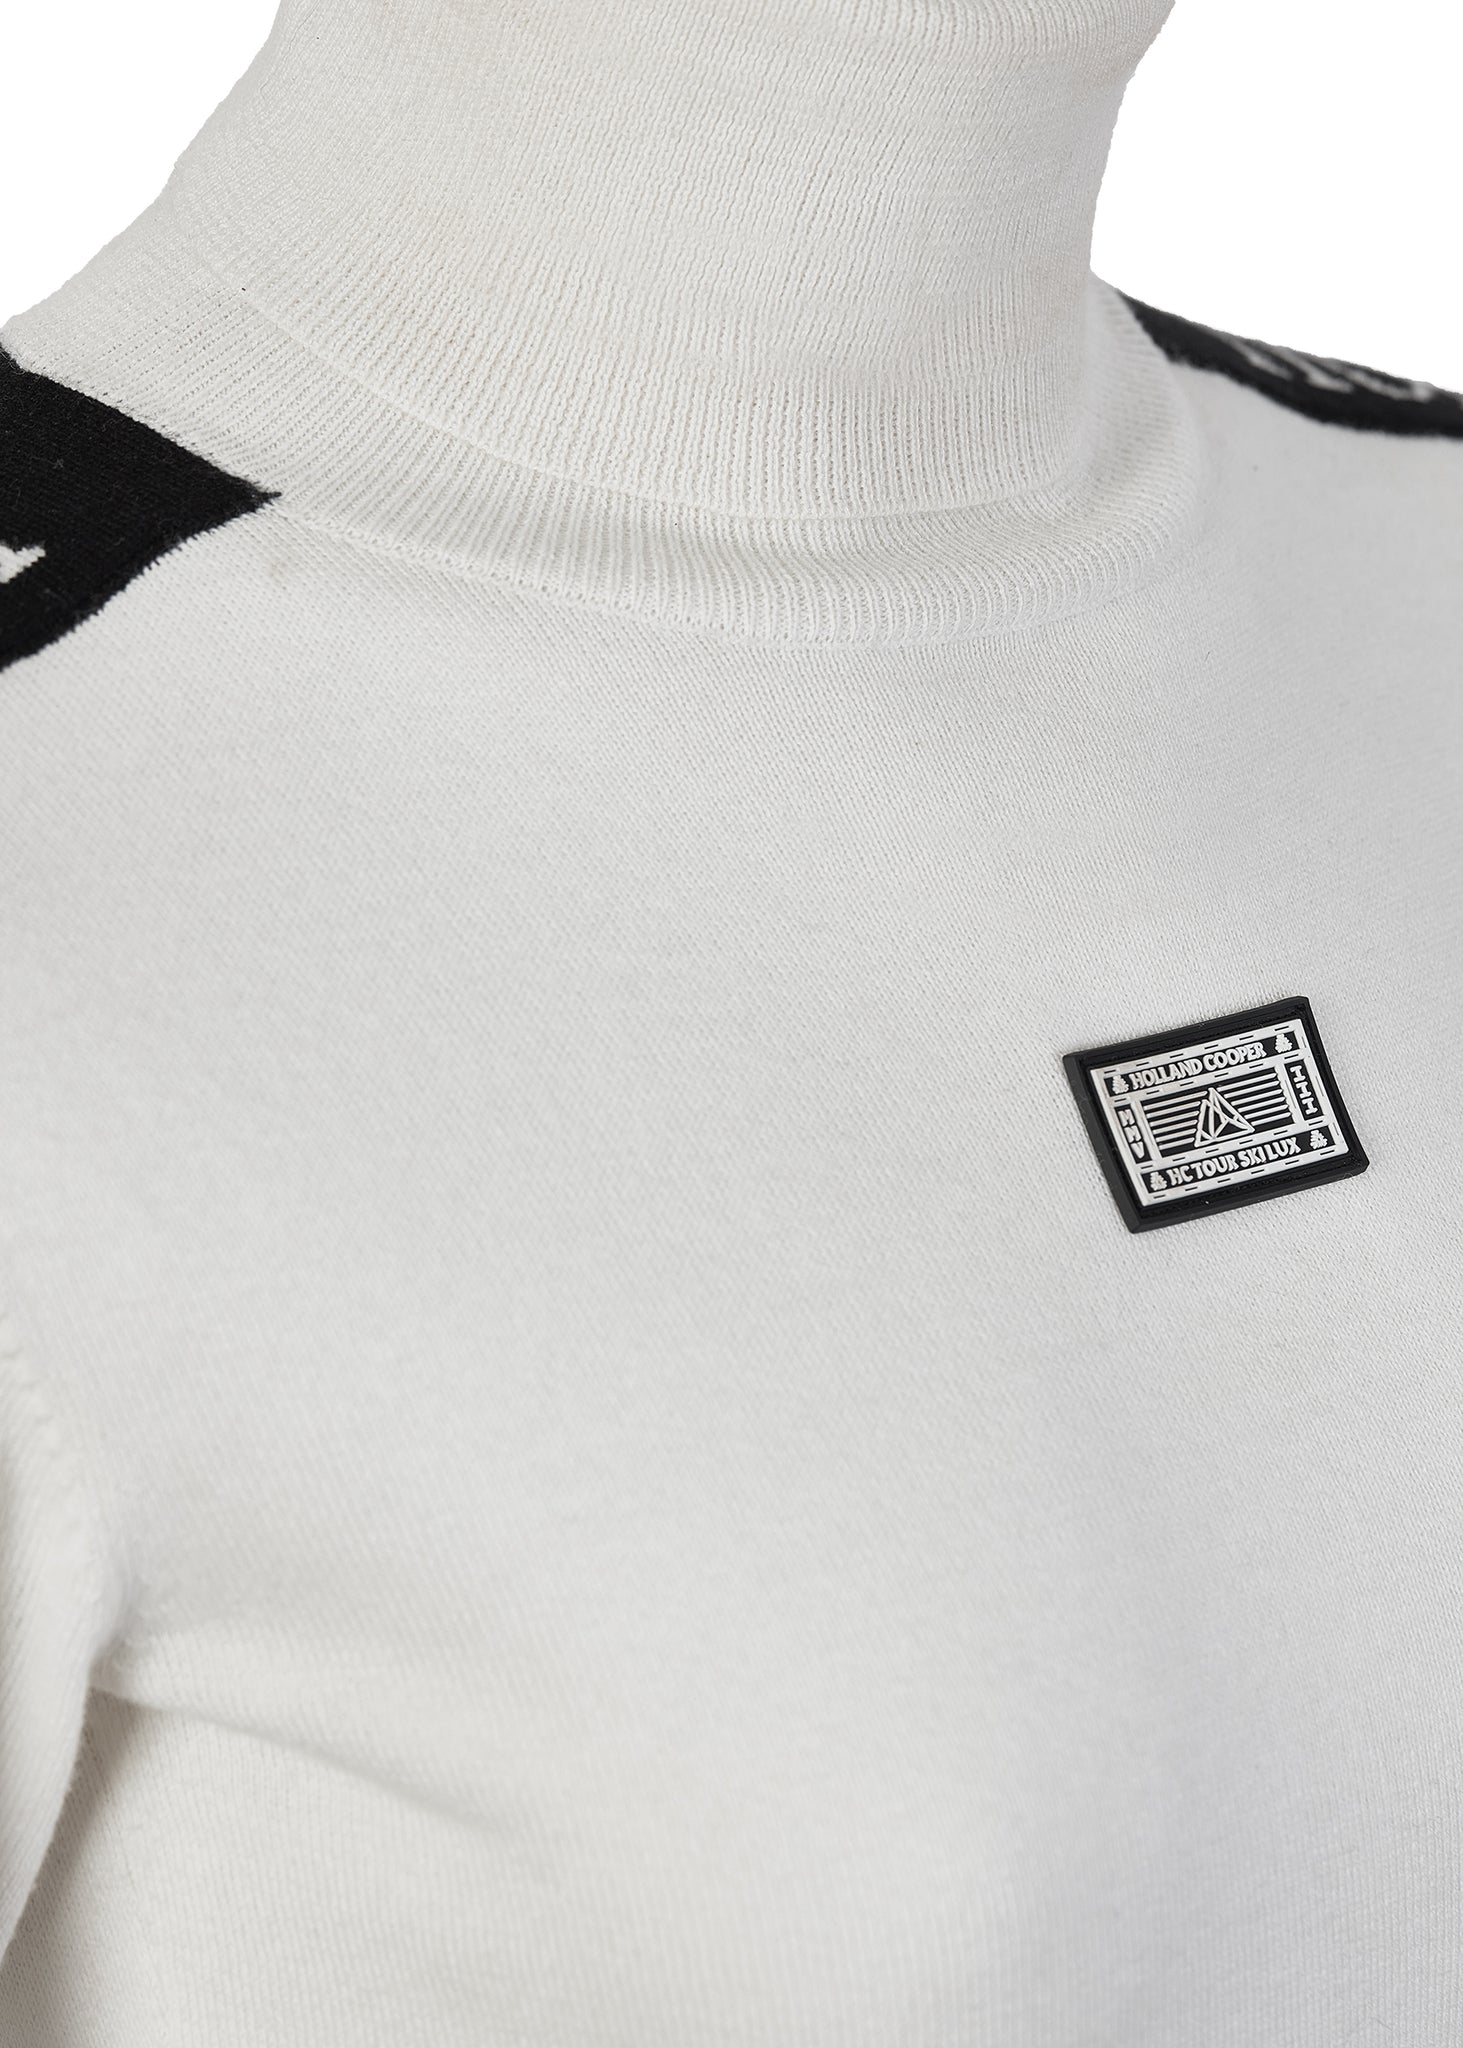 roll neck and centre front branded patch detail on thermal fitted roll neck knit in white with black monogram intarsia knit panels down tops of arms